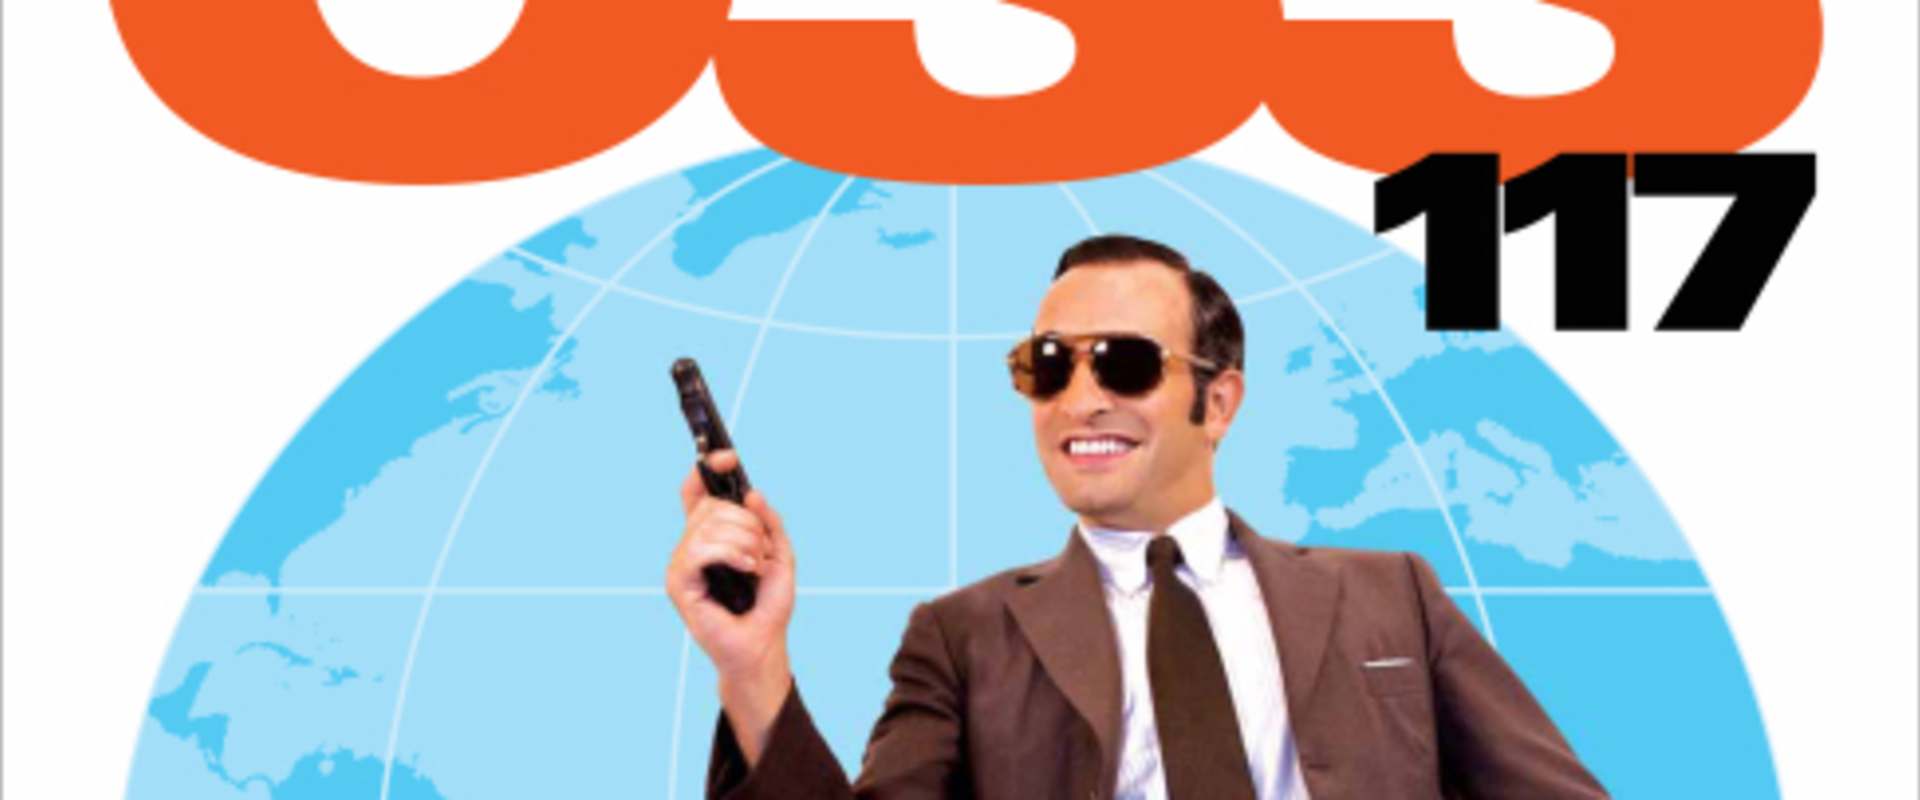 OSS 117: Lost in Rio background 2